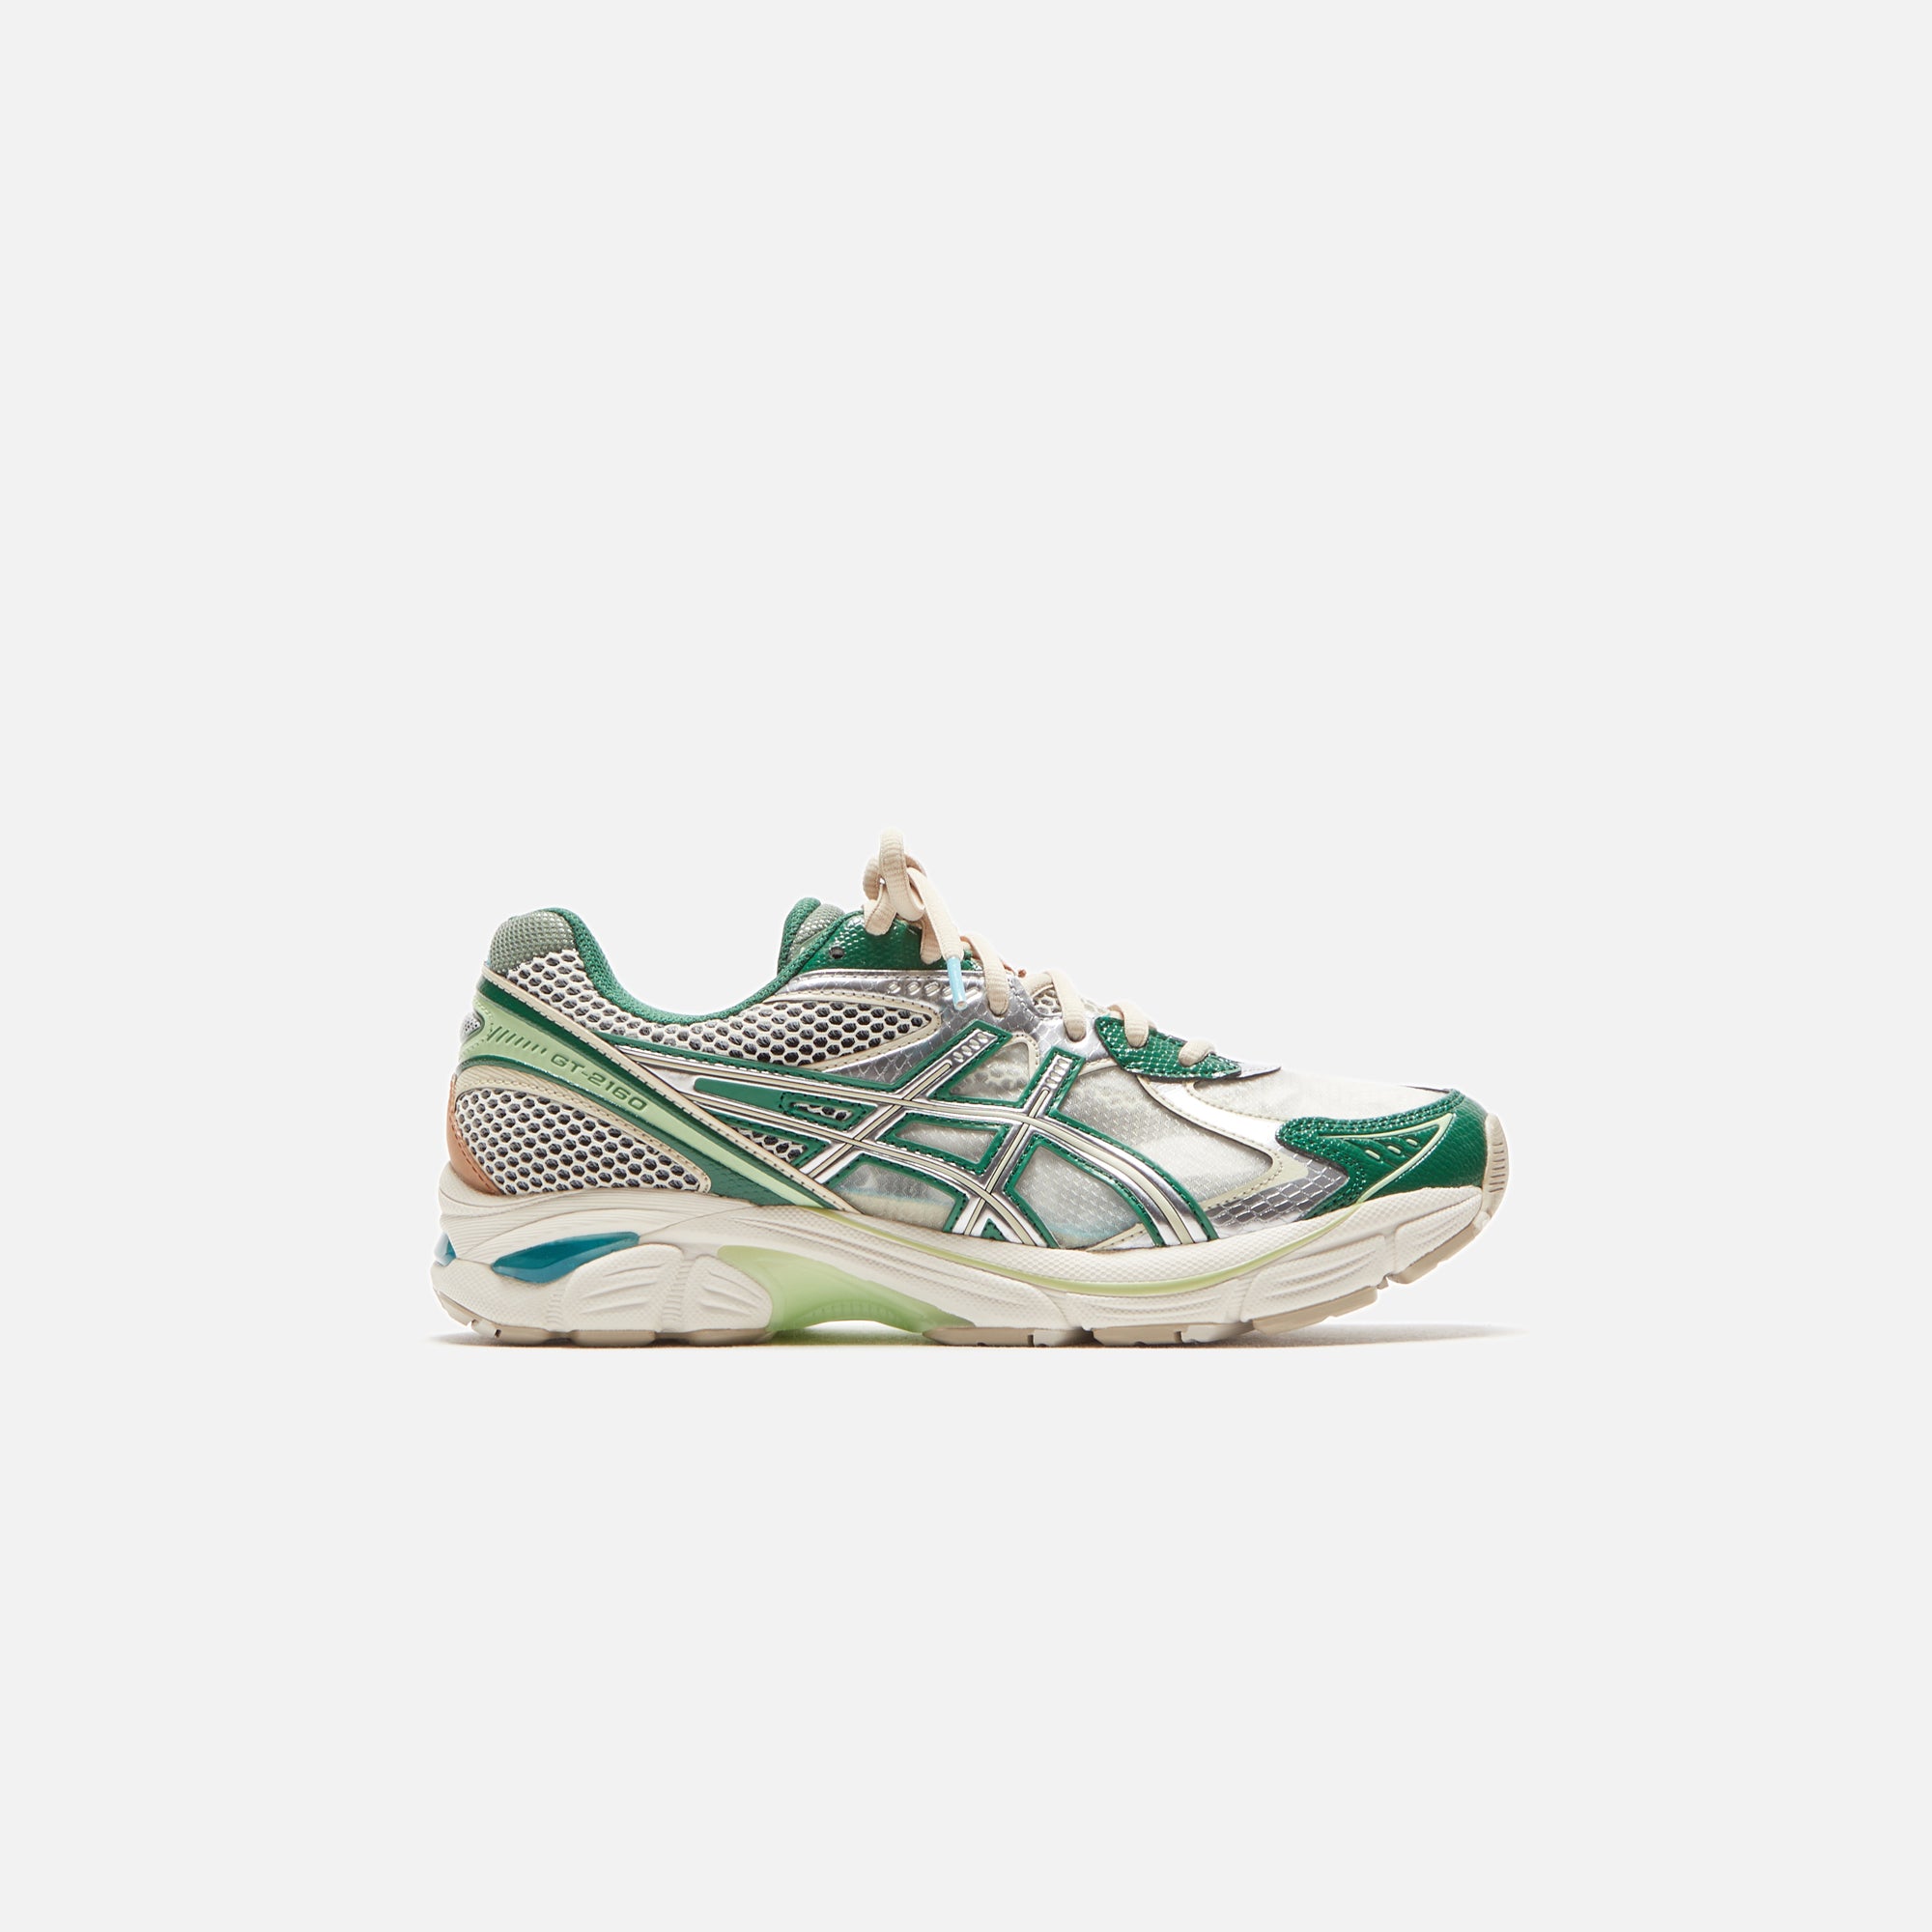 ASICS x Above the Clouds GT-2160 - Cream / Shamrock Green – Kith